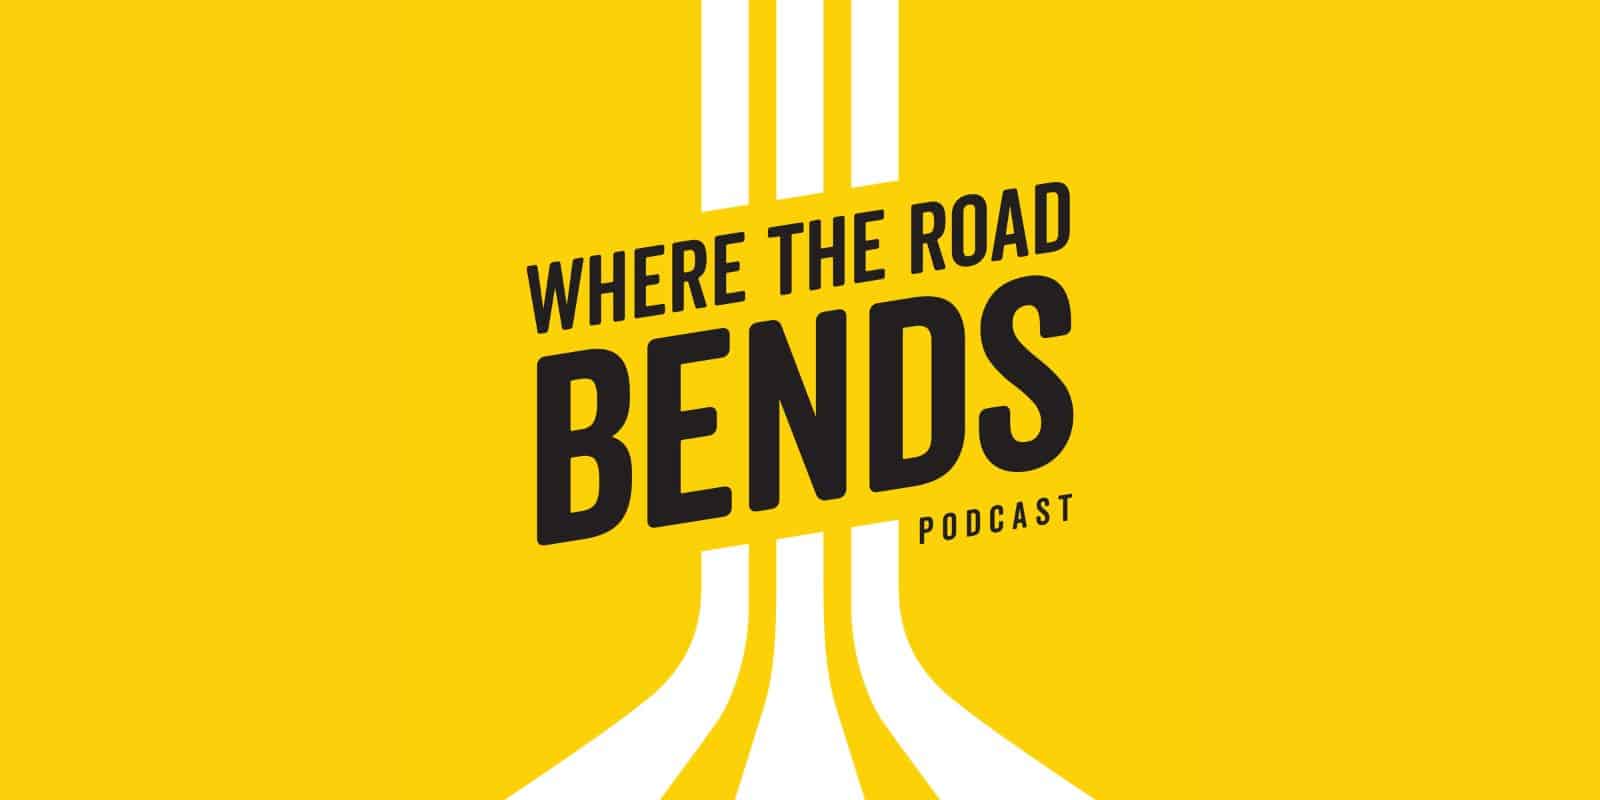 Where the Road Bends Podcast